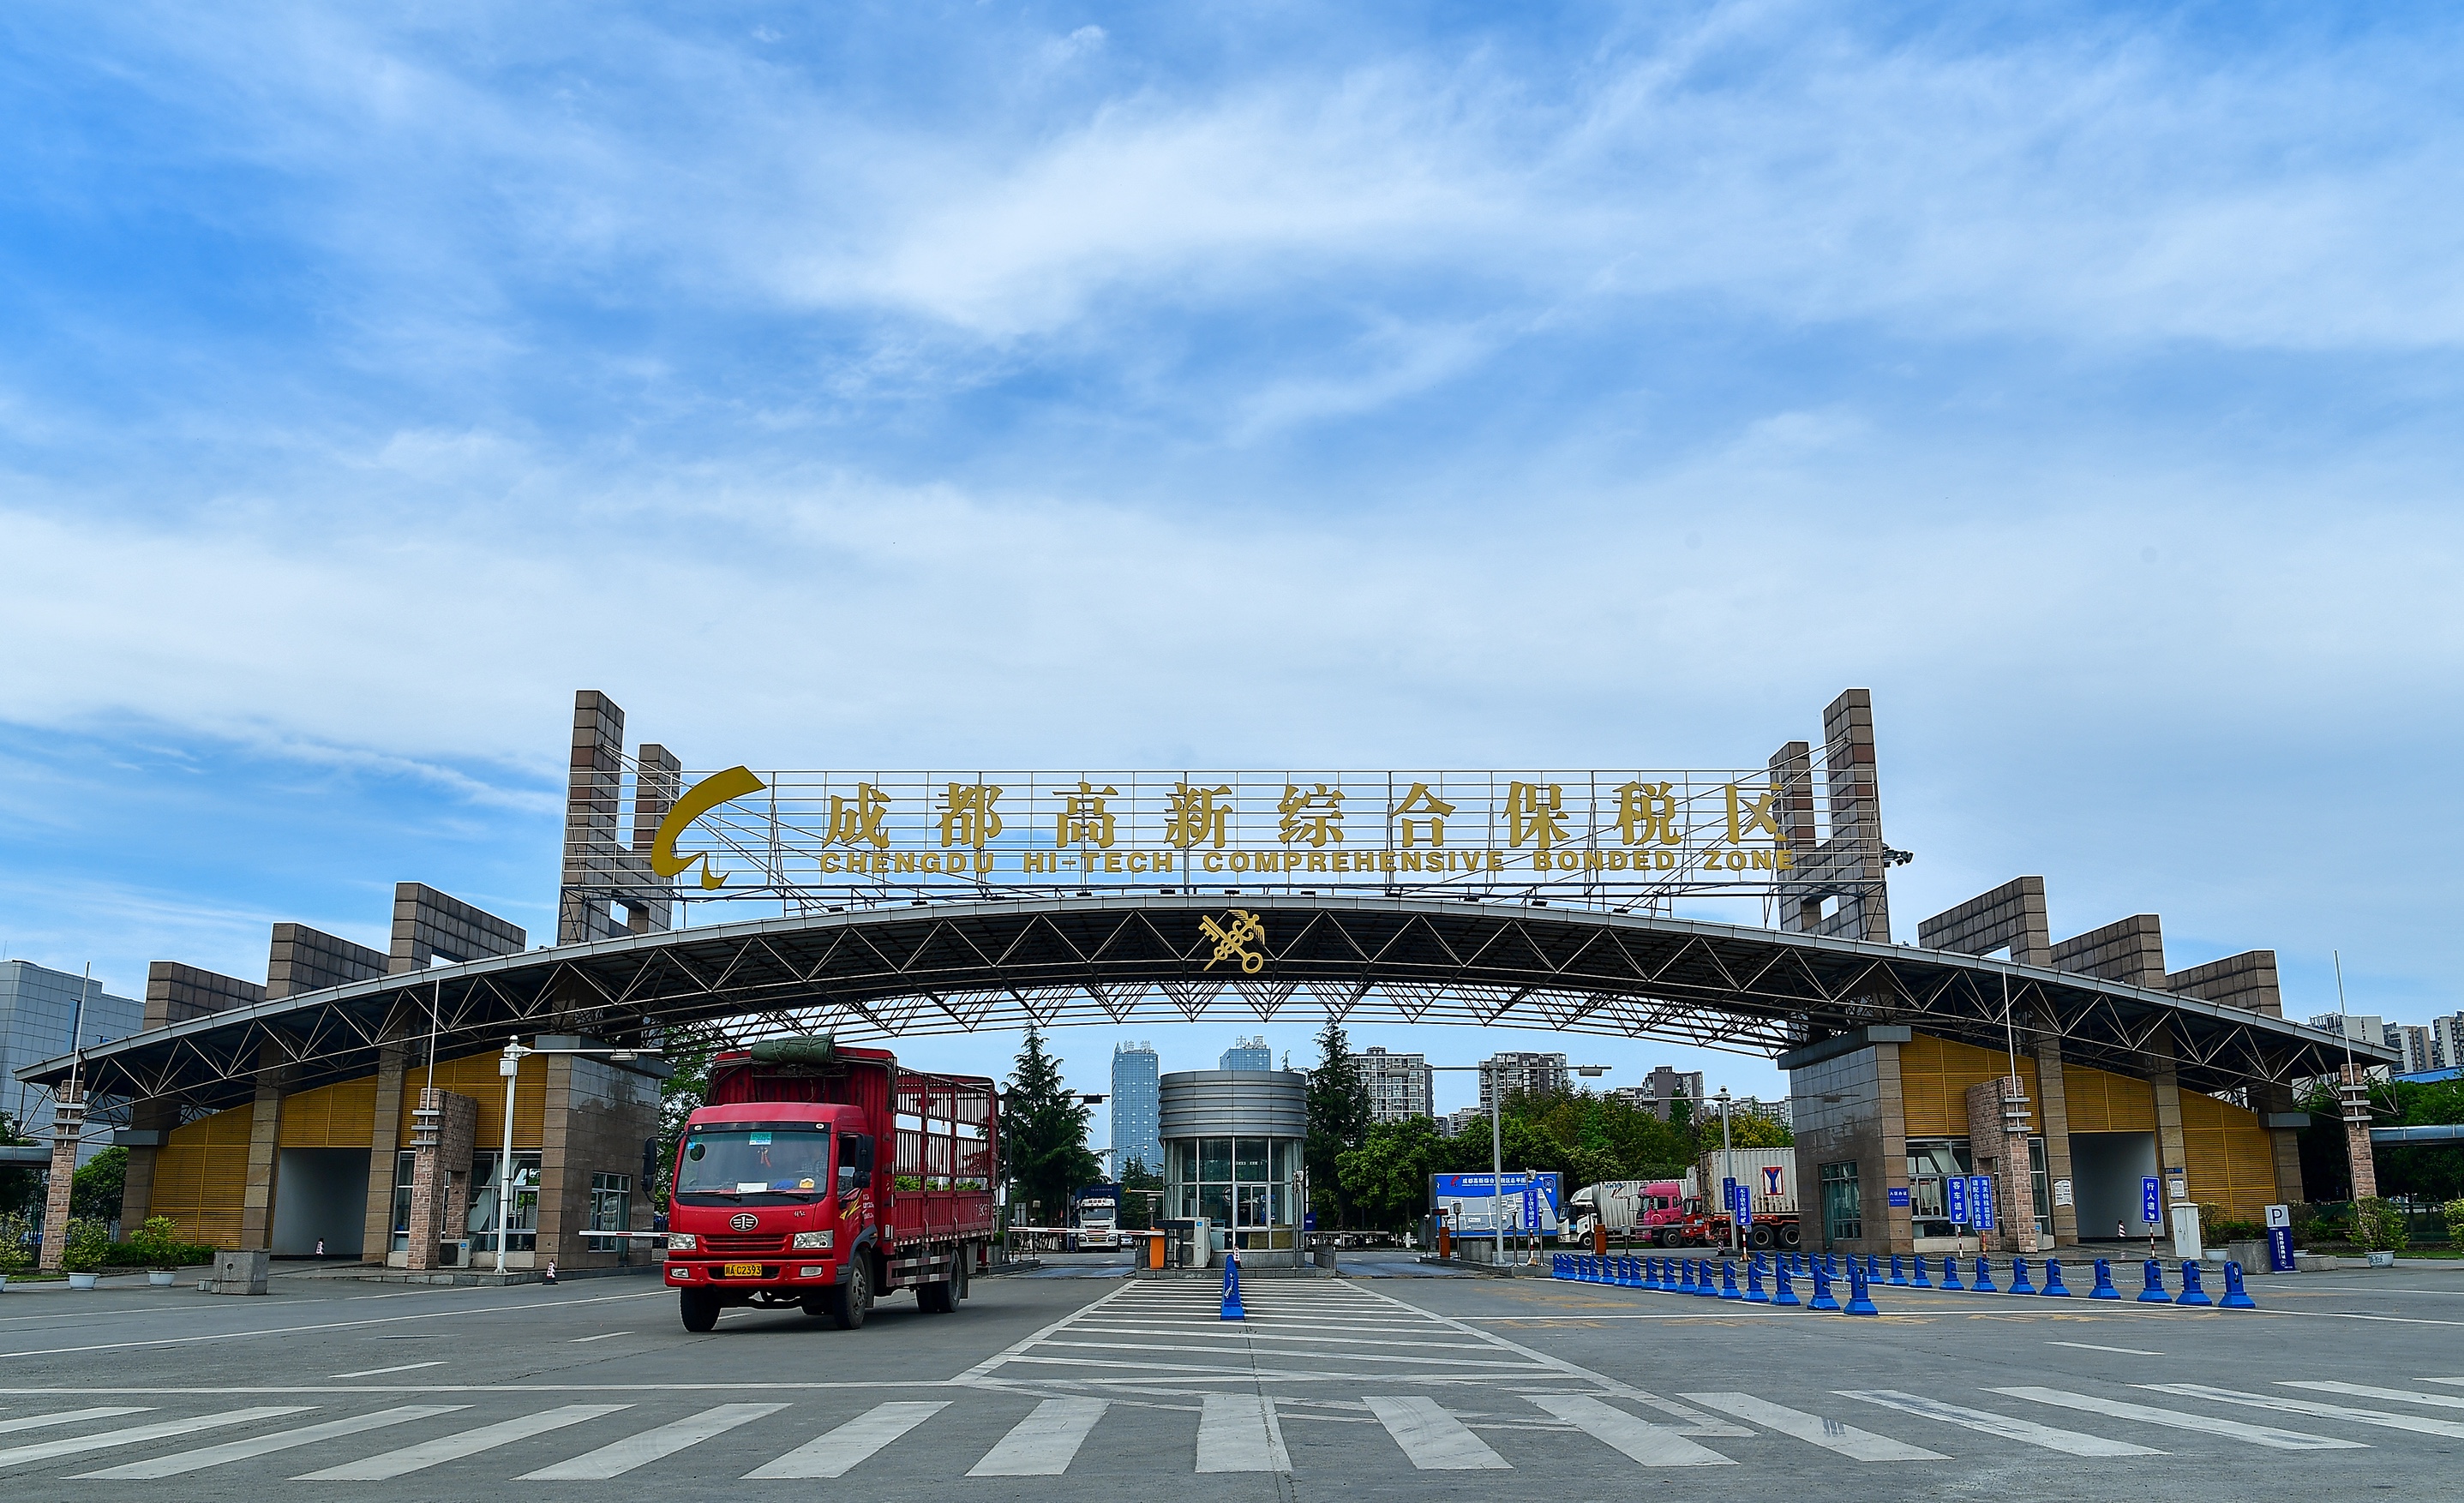 Chengdu High Tech Comprehensive Bonded Area: First among China in terms of total import and export volume for 23 consecutive months